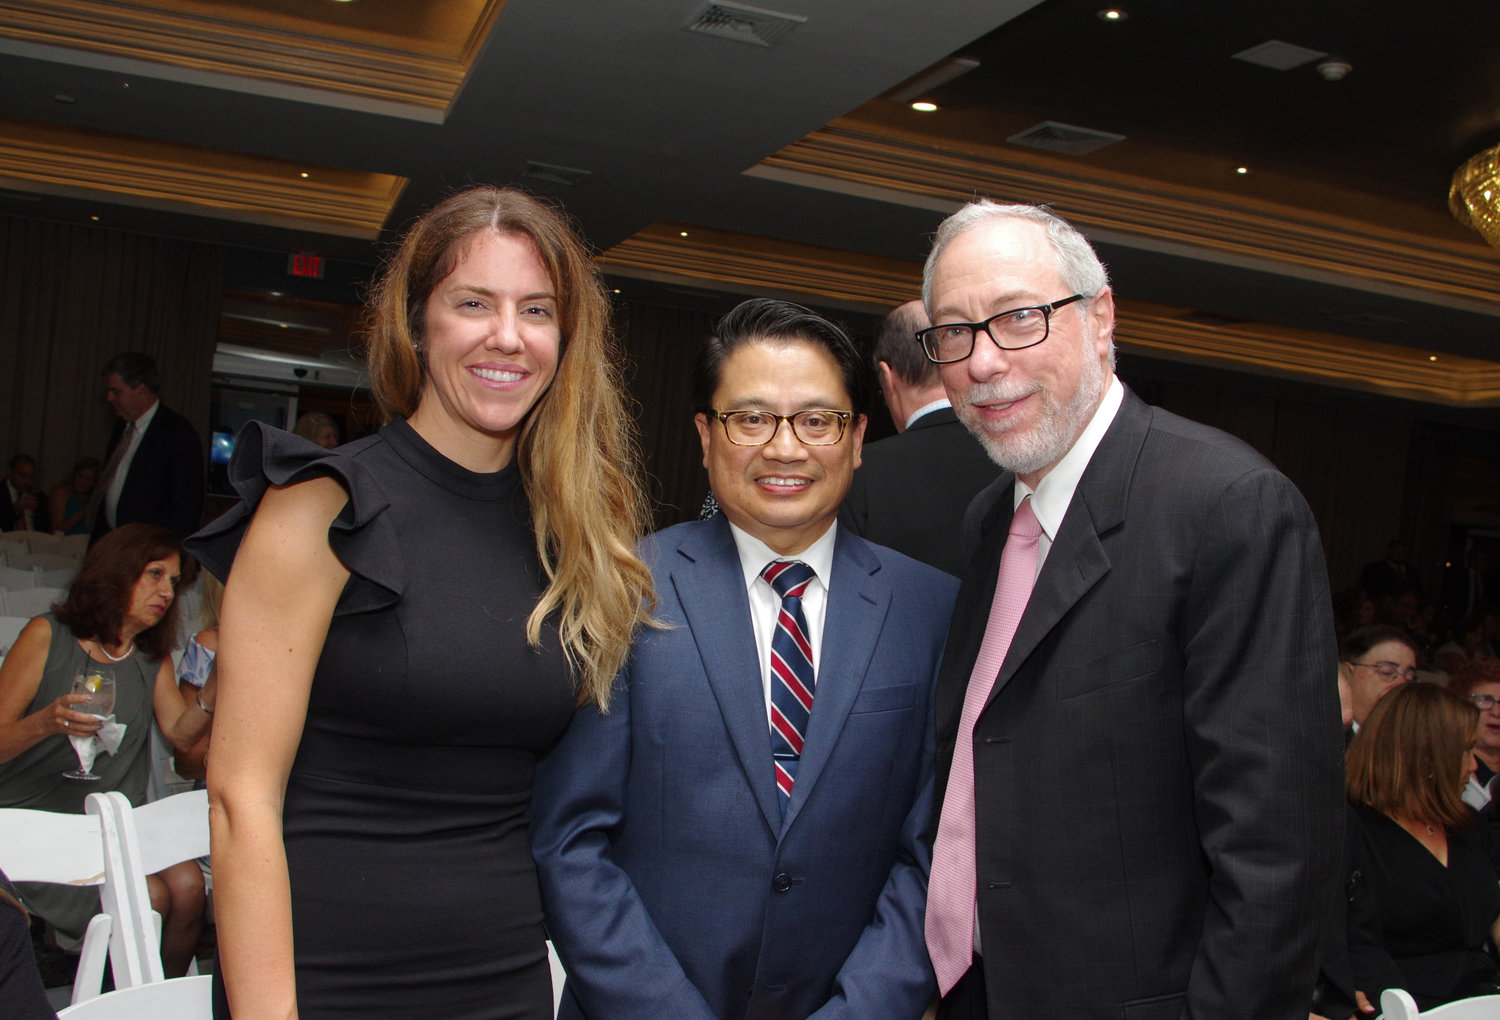 Mount Sinai South Nassau hospital hosted its annual Soiree Under the Stars gala on Sept. 28. Nurse Tracy Thorn, left, was recognized with the Cupola Award, while Dr. Ricardo Cruz, center, was honored with the Mary Pearson Award. Above, the two recipients with Department of Medicine Chairman Dr. Aaron Glatt.